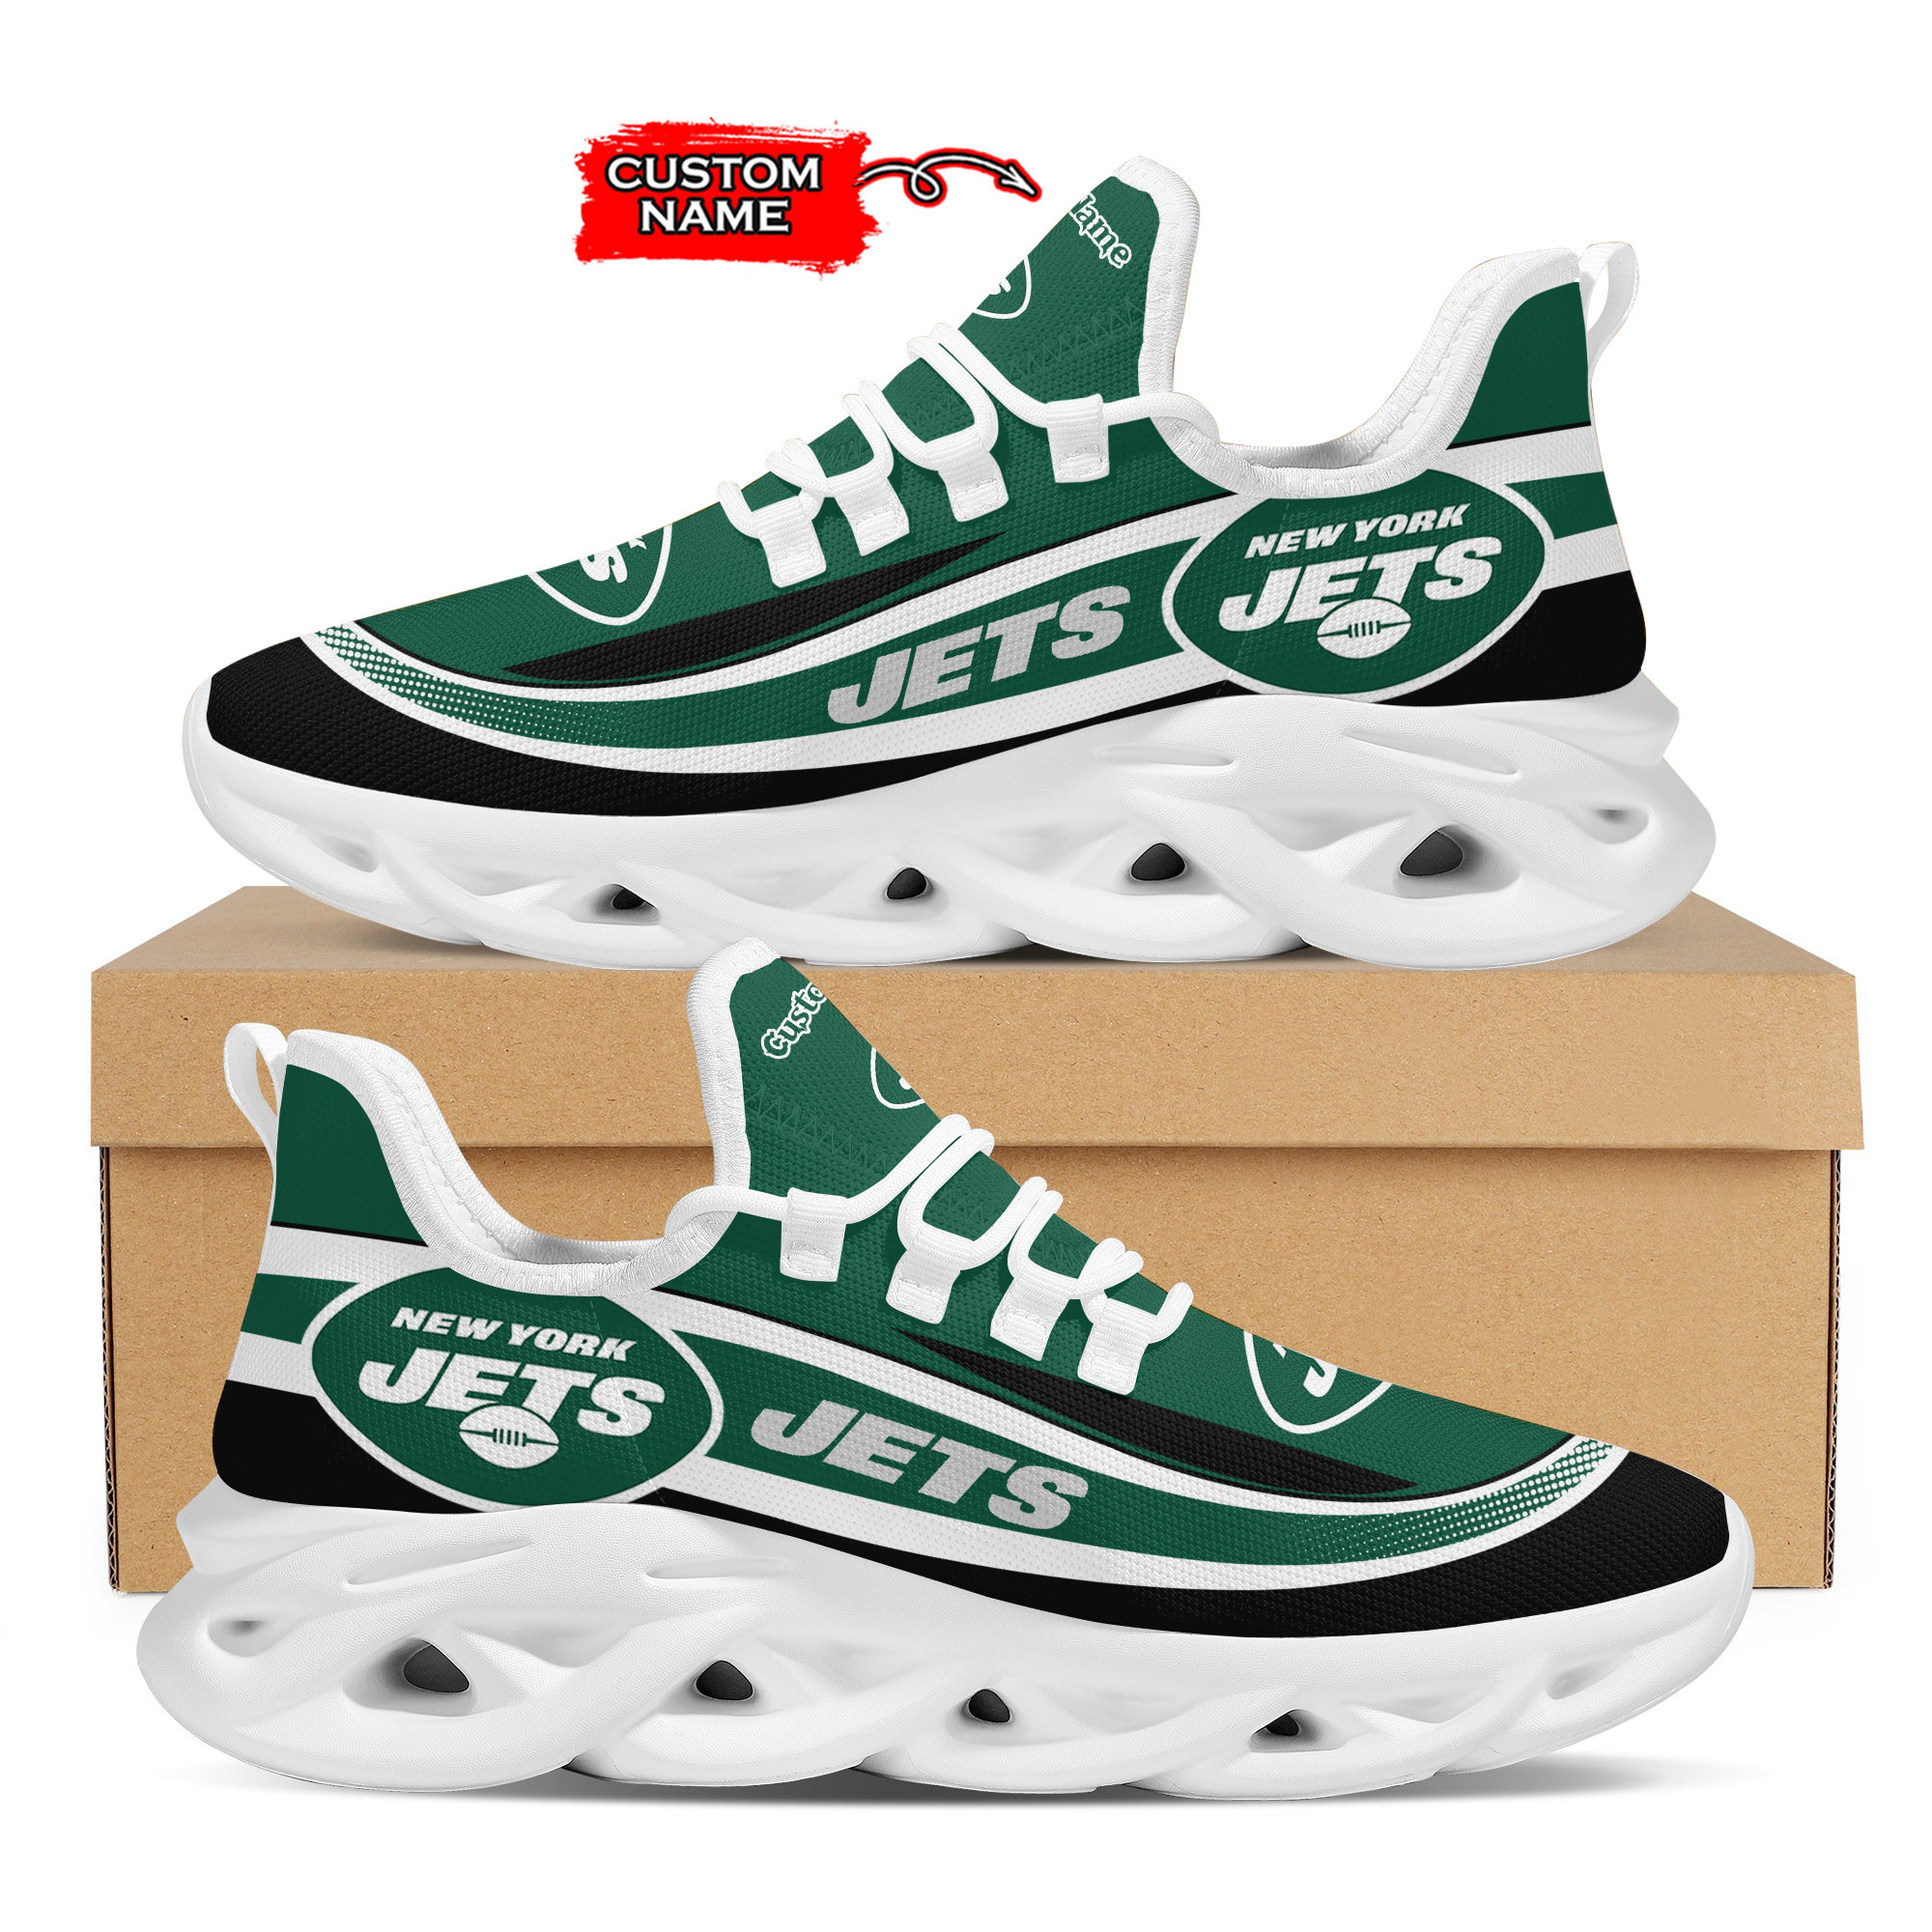 New York Jets Nfl Custom Name Clunky Max Soul Shoes Sneakers For Mens Womens Personalized Gifts – Hothot